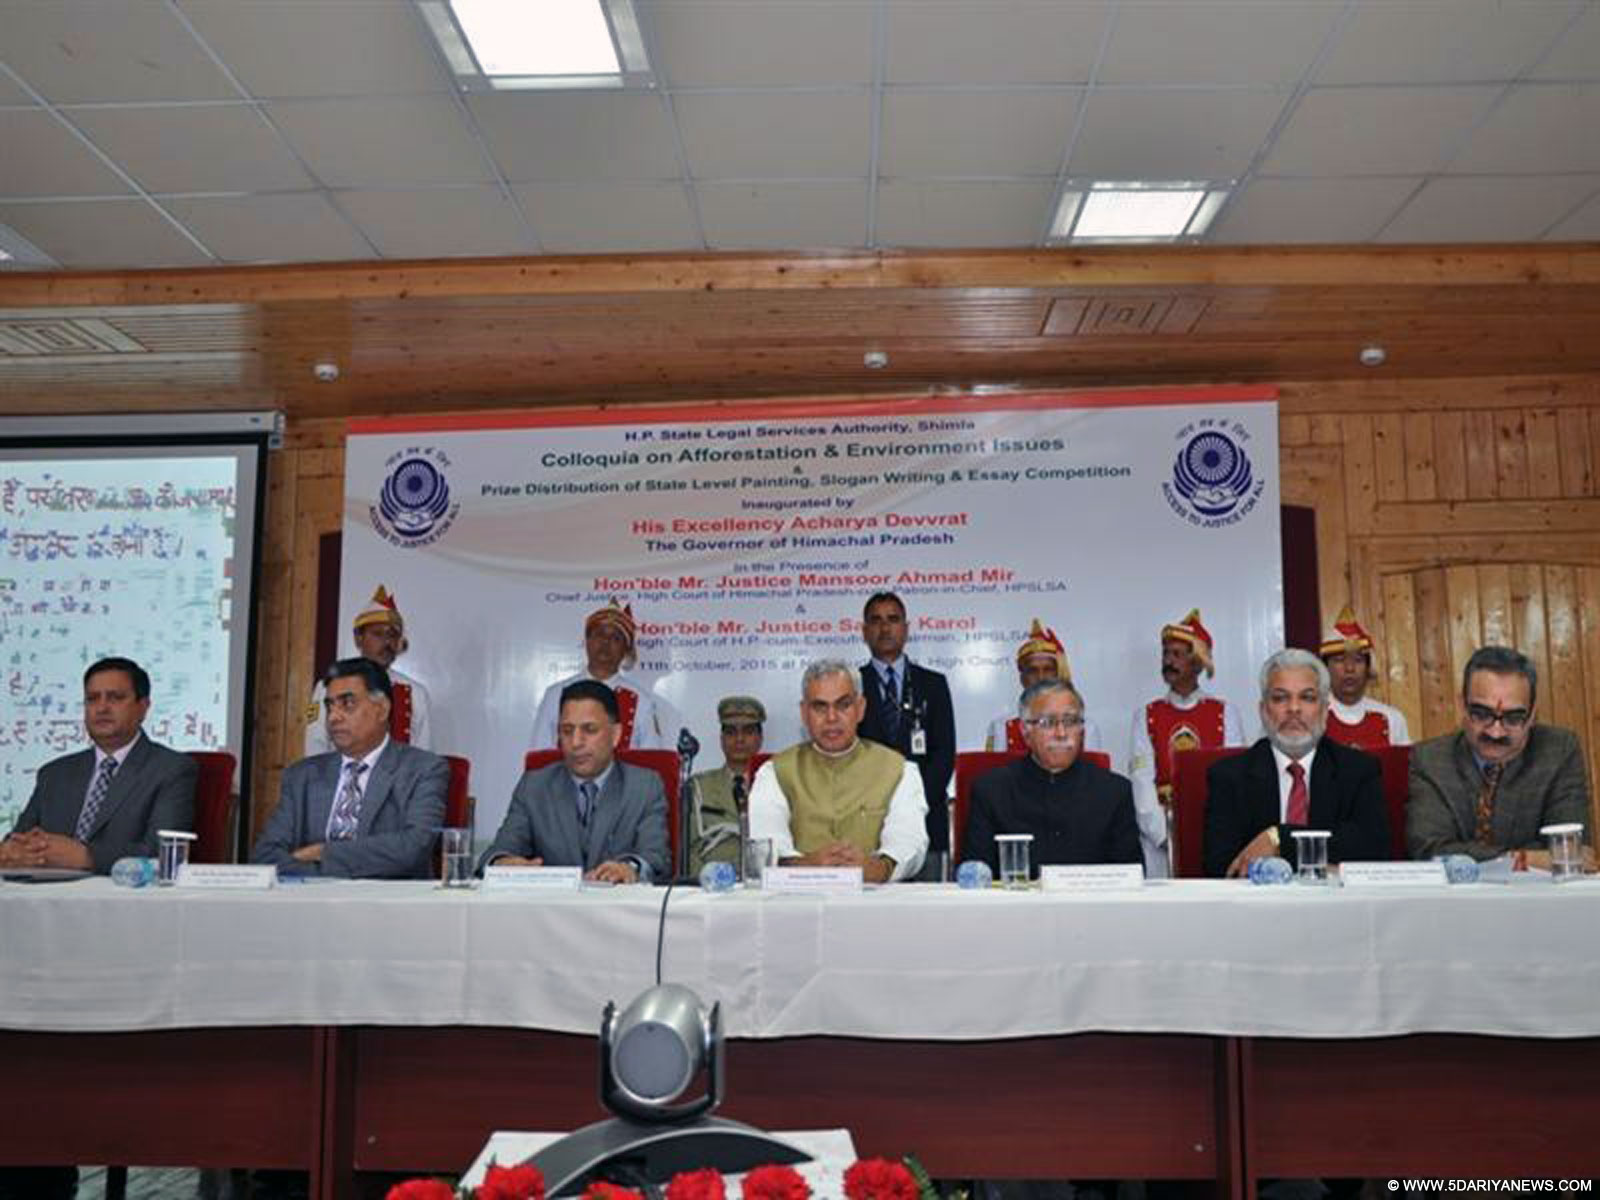 Governor Acharya Devvrat presiding over the Colloquia on Afforestation and Environmental Issues at Shimla on 11 Oct. 2015.